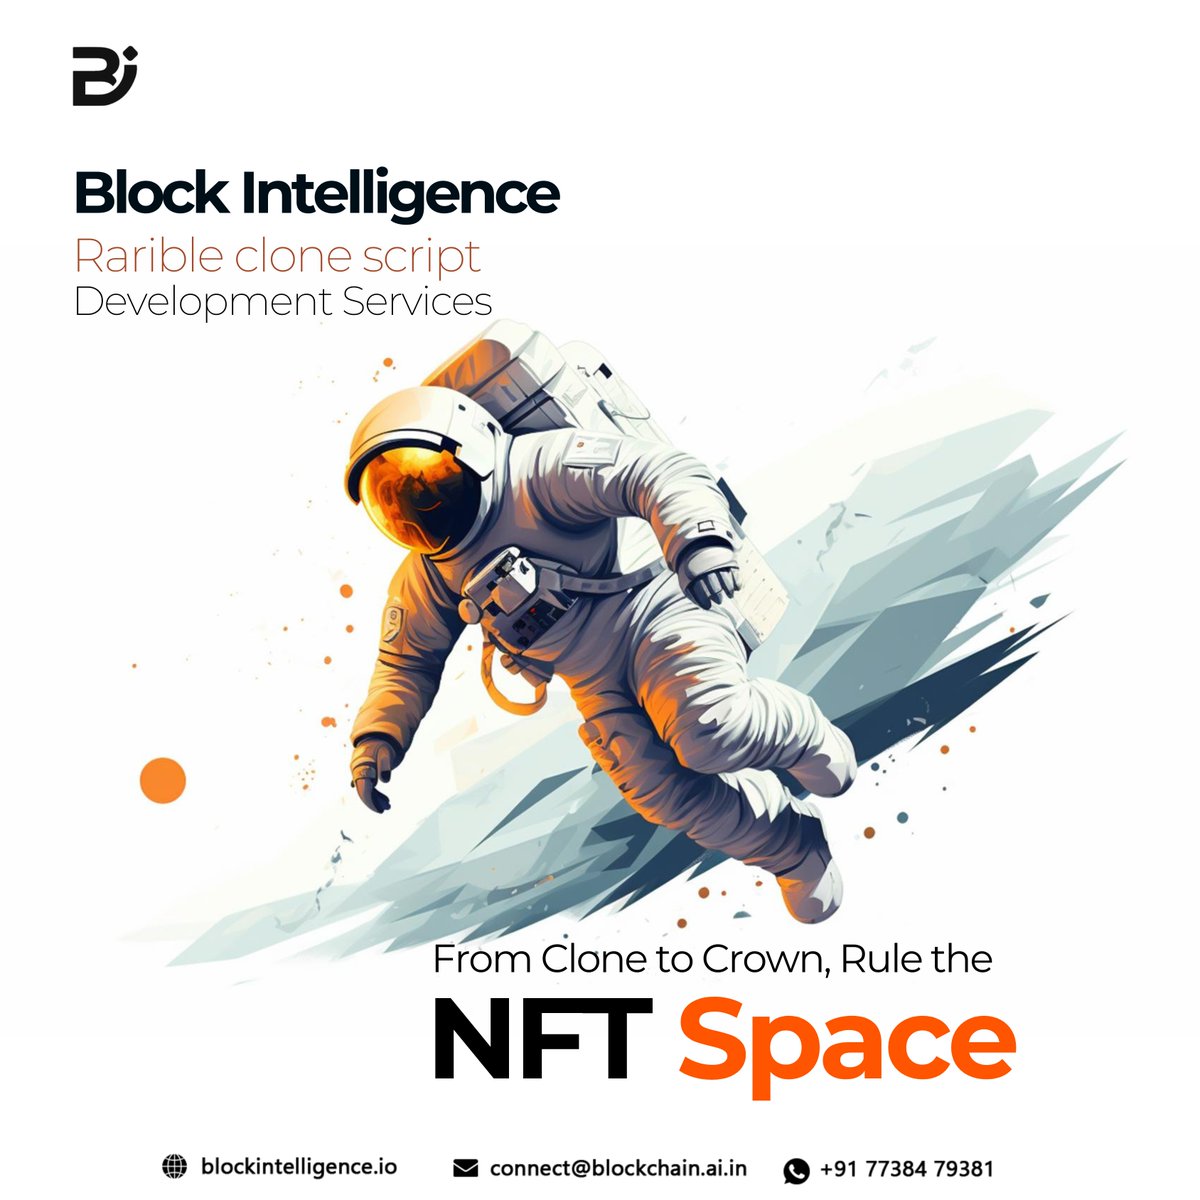 It's your time to shine in the NFT universe with a platform that's as unique as your vision. 😎

#nft #nftart #nftartists #nftcollector #nftmarketplace #nftartist #nonfungibletoken #token #tokenization #tokens #cryptoart